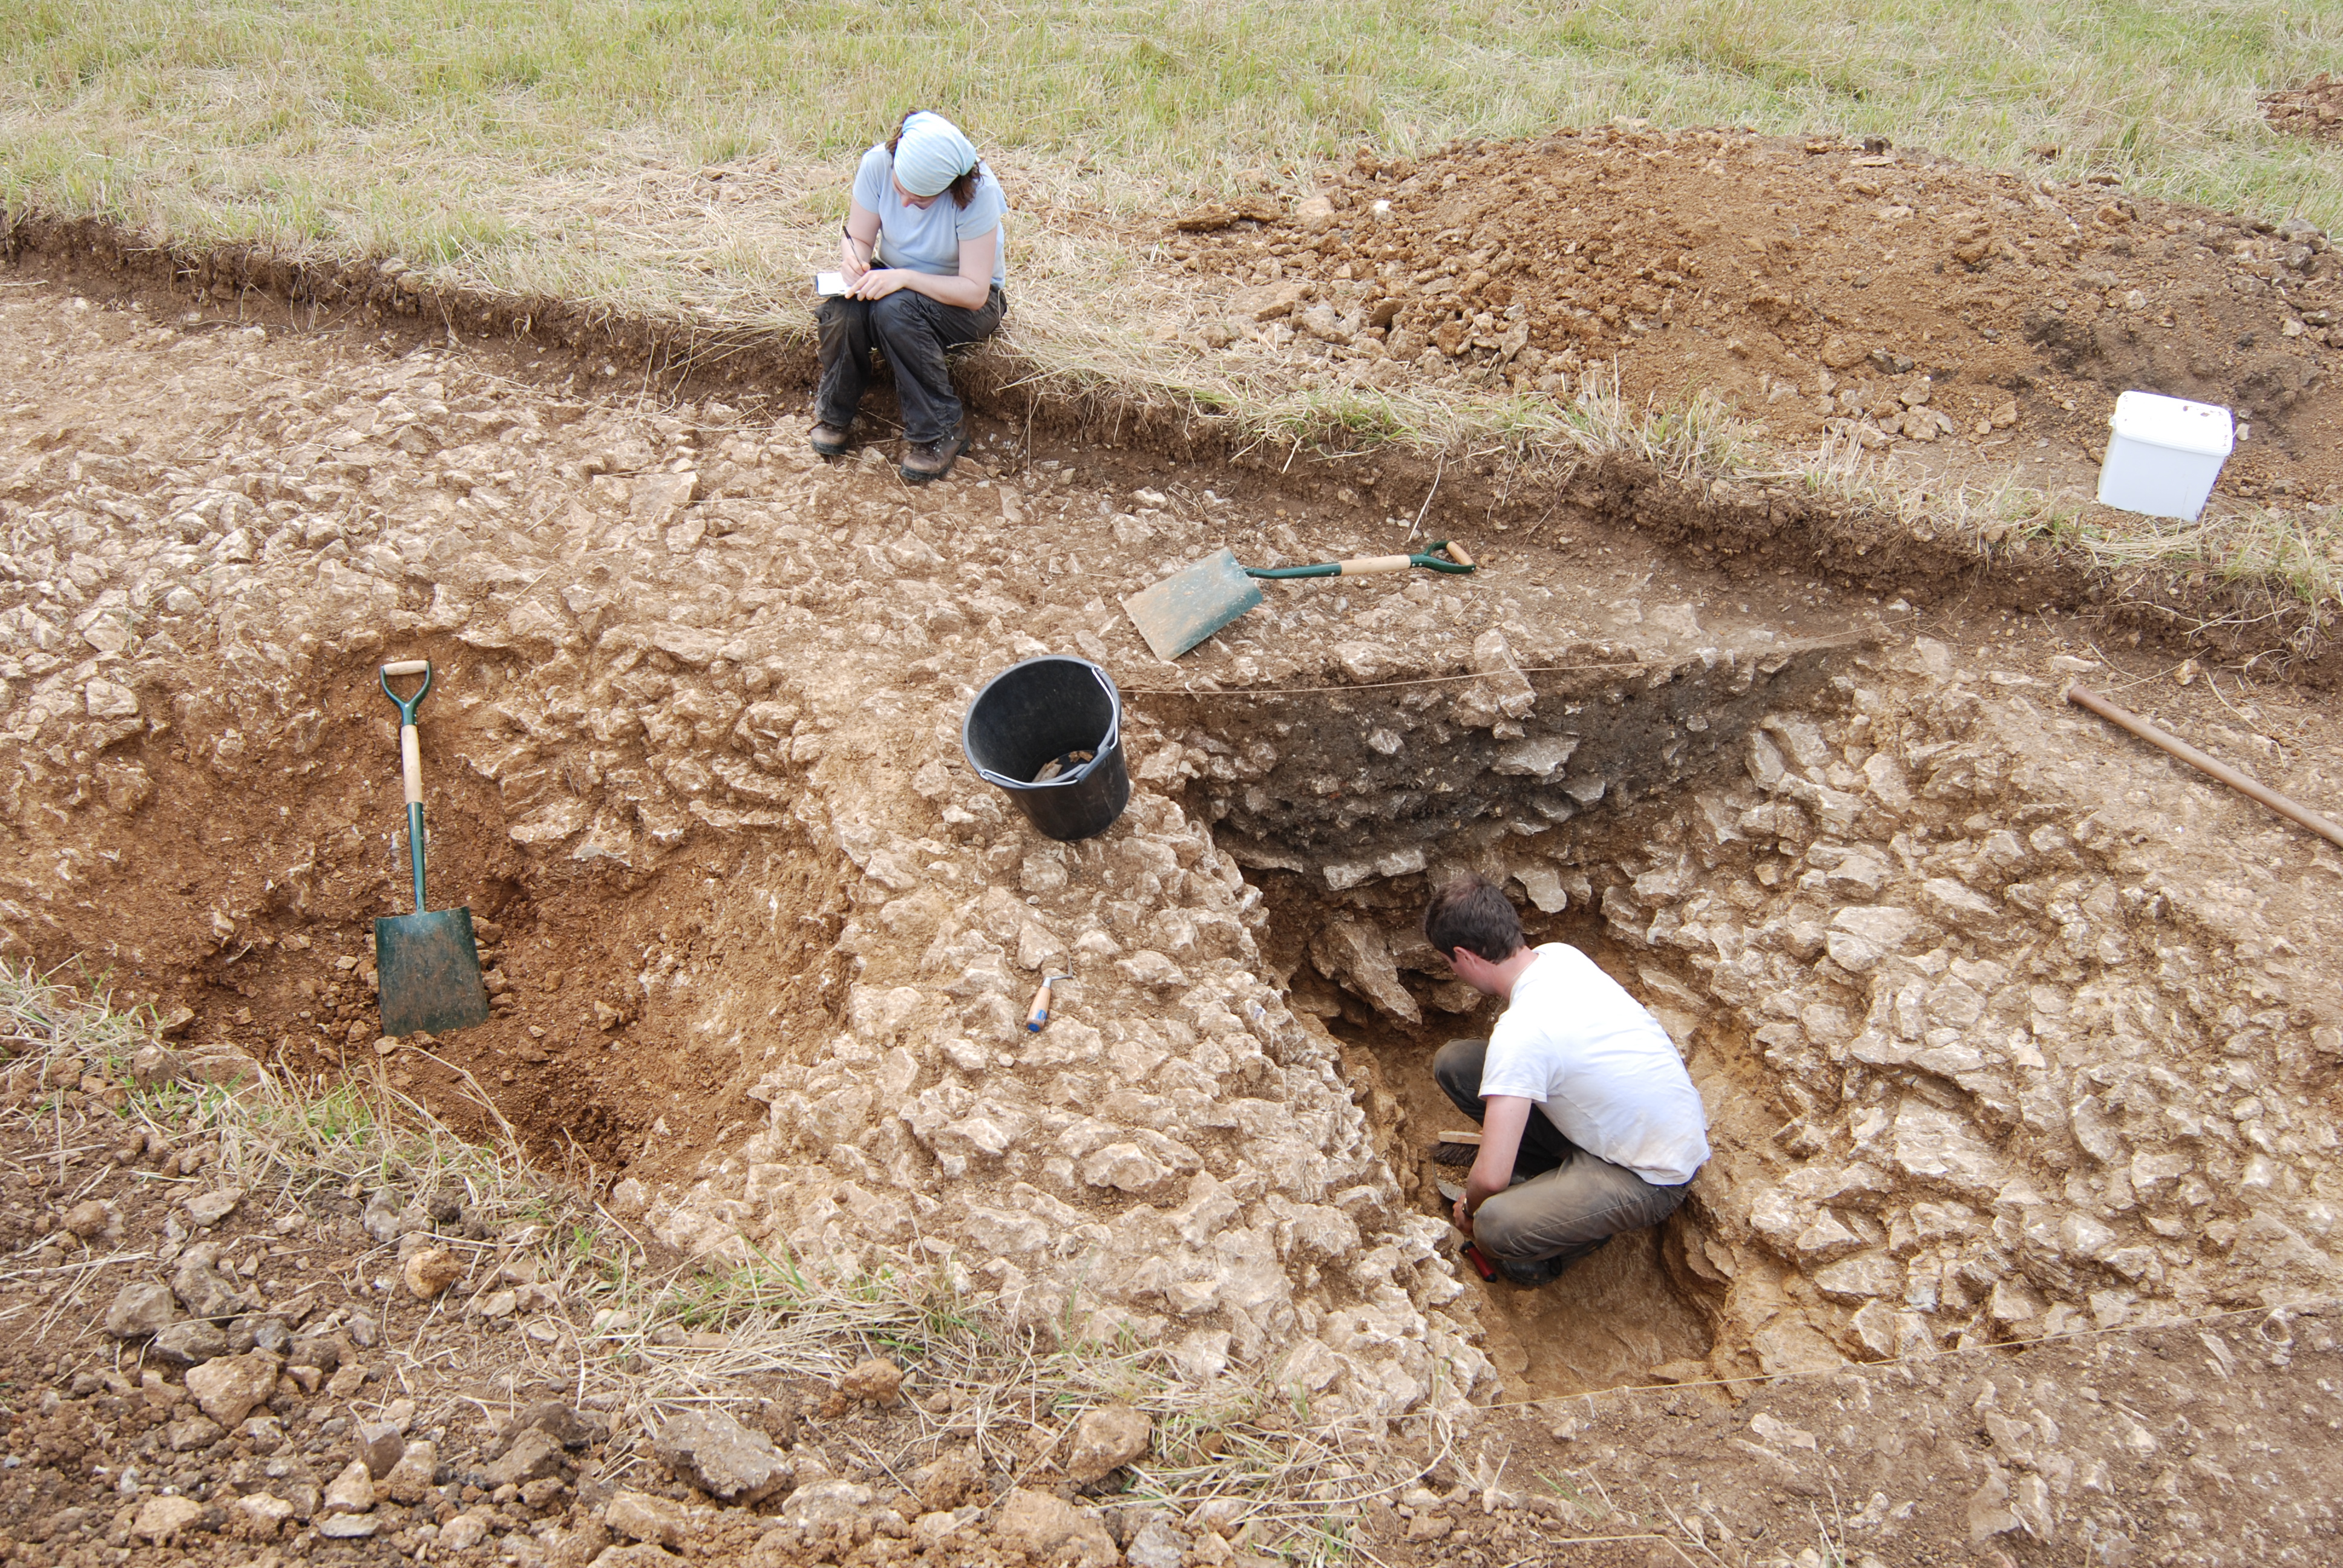 Two students on an archaeological dig with spades and a bucket